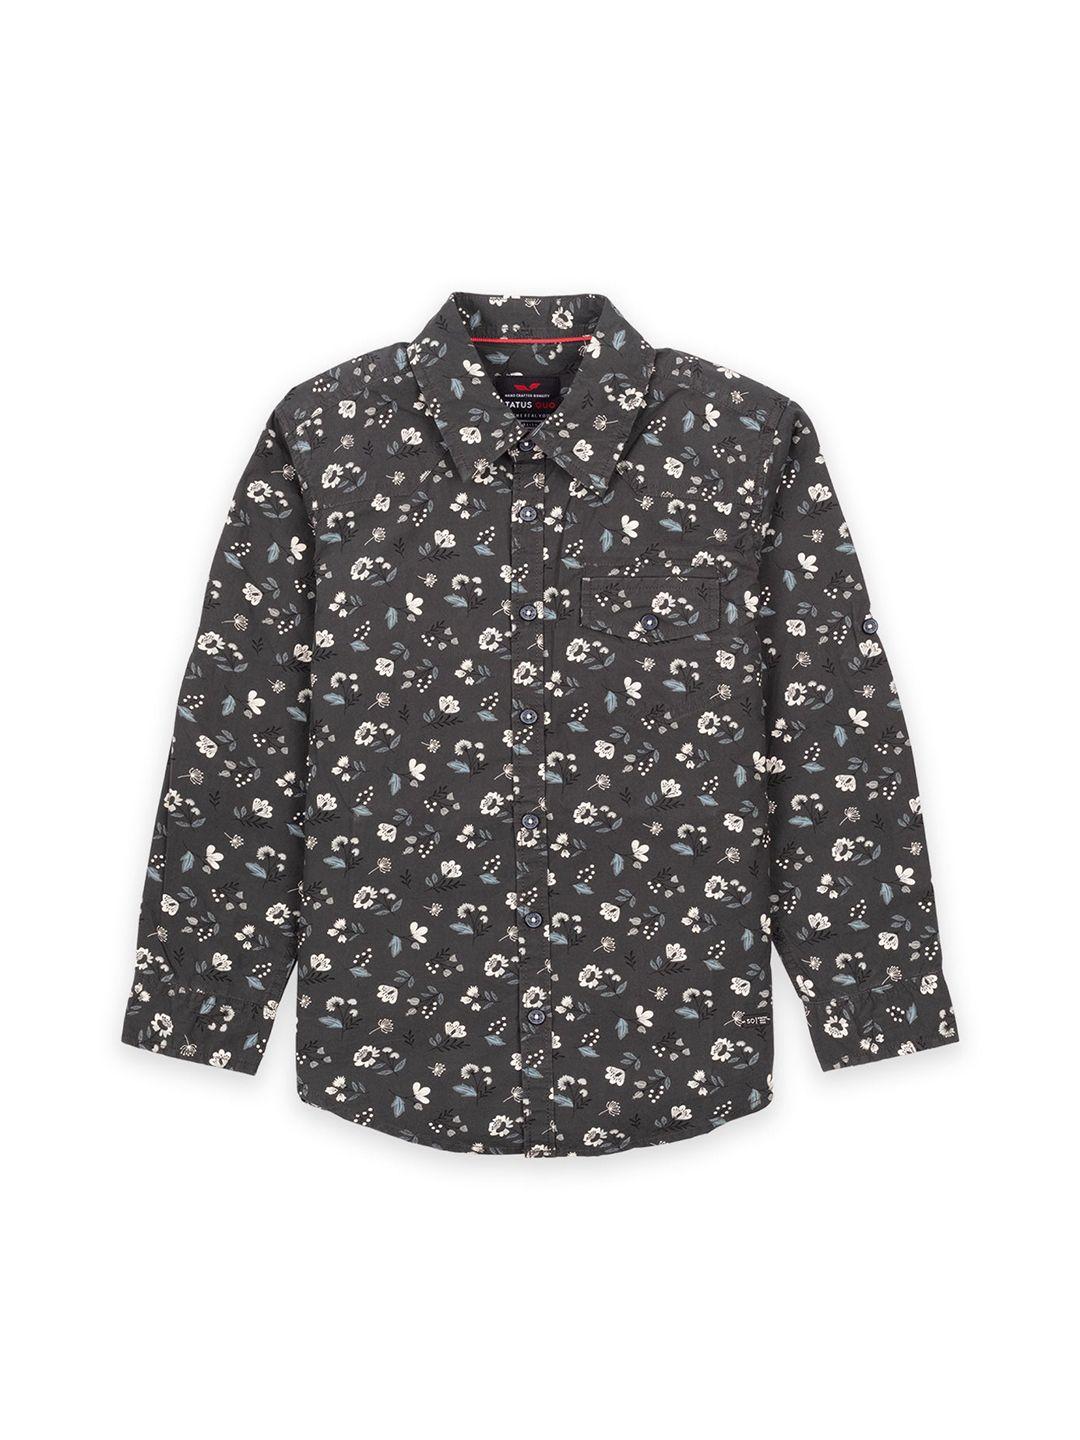 status quo boys charcoal grey classic floral printed cotton casual shirt